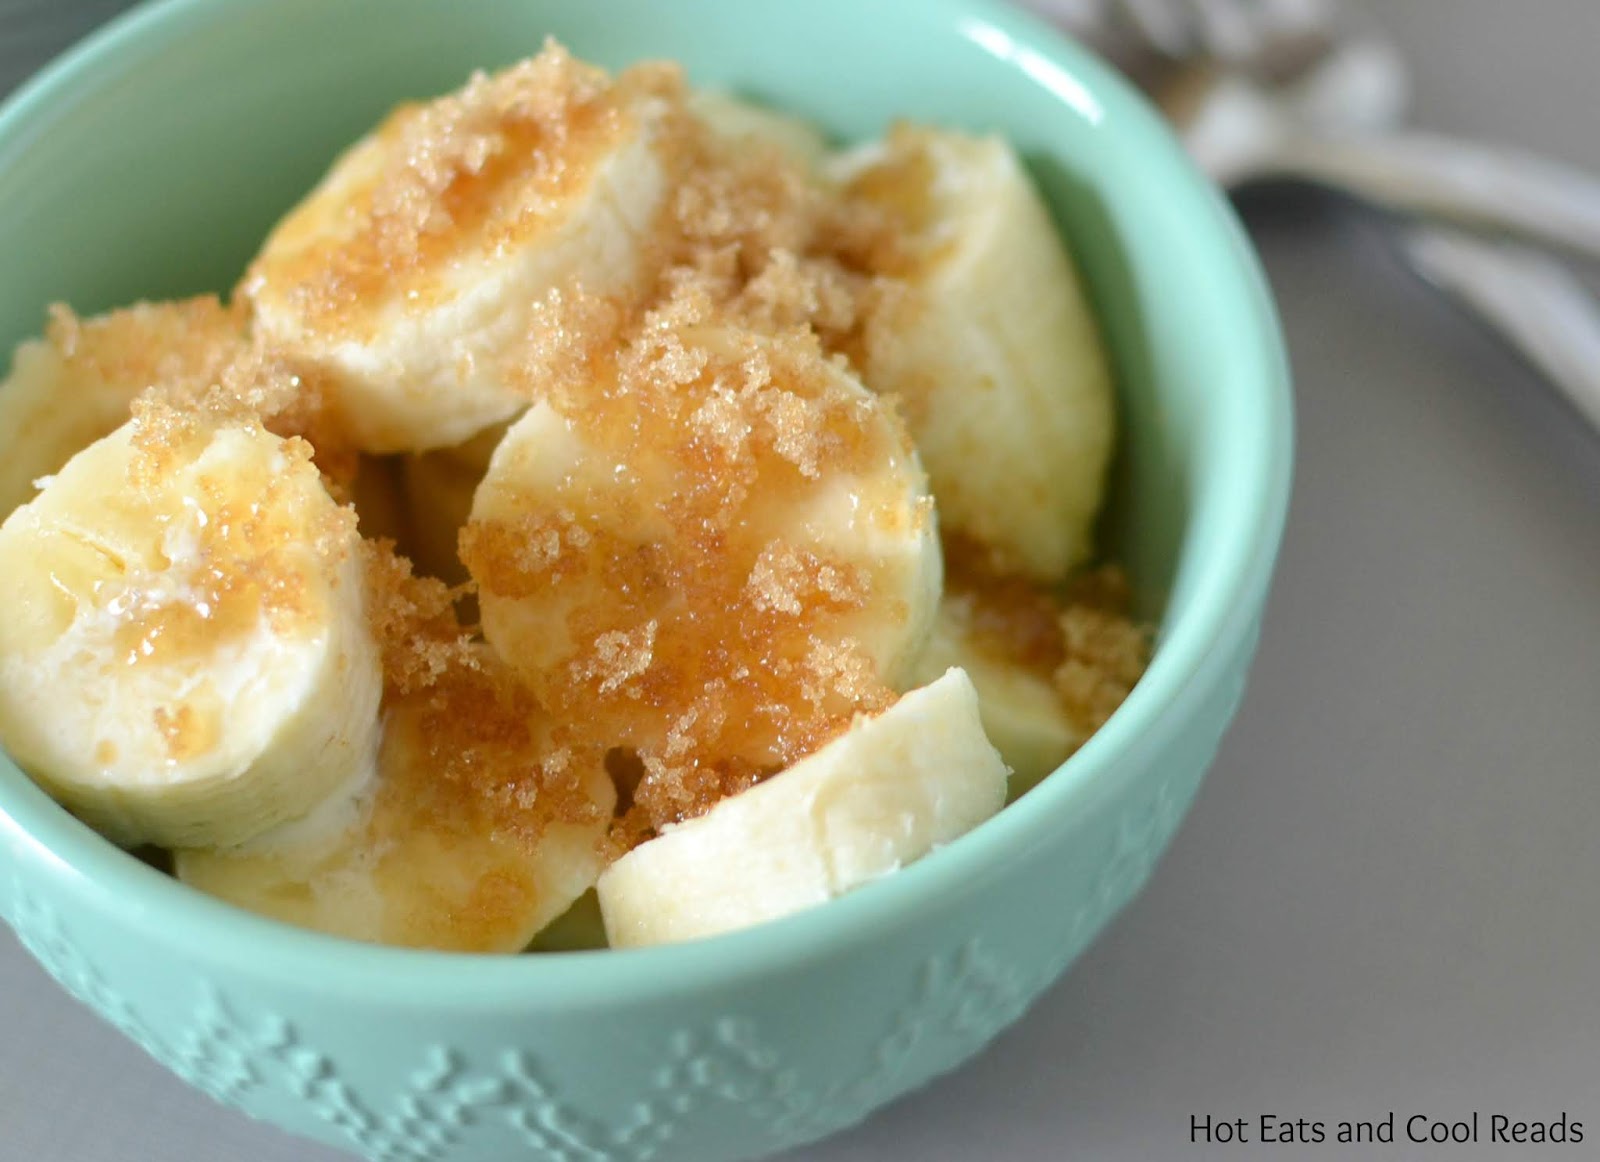 Brown Sugar Bananas and Cream Recipe from Hot Eats and Cool Reads! This sweet treat is ready in minutes and is great for breakfast or as a dessert!